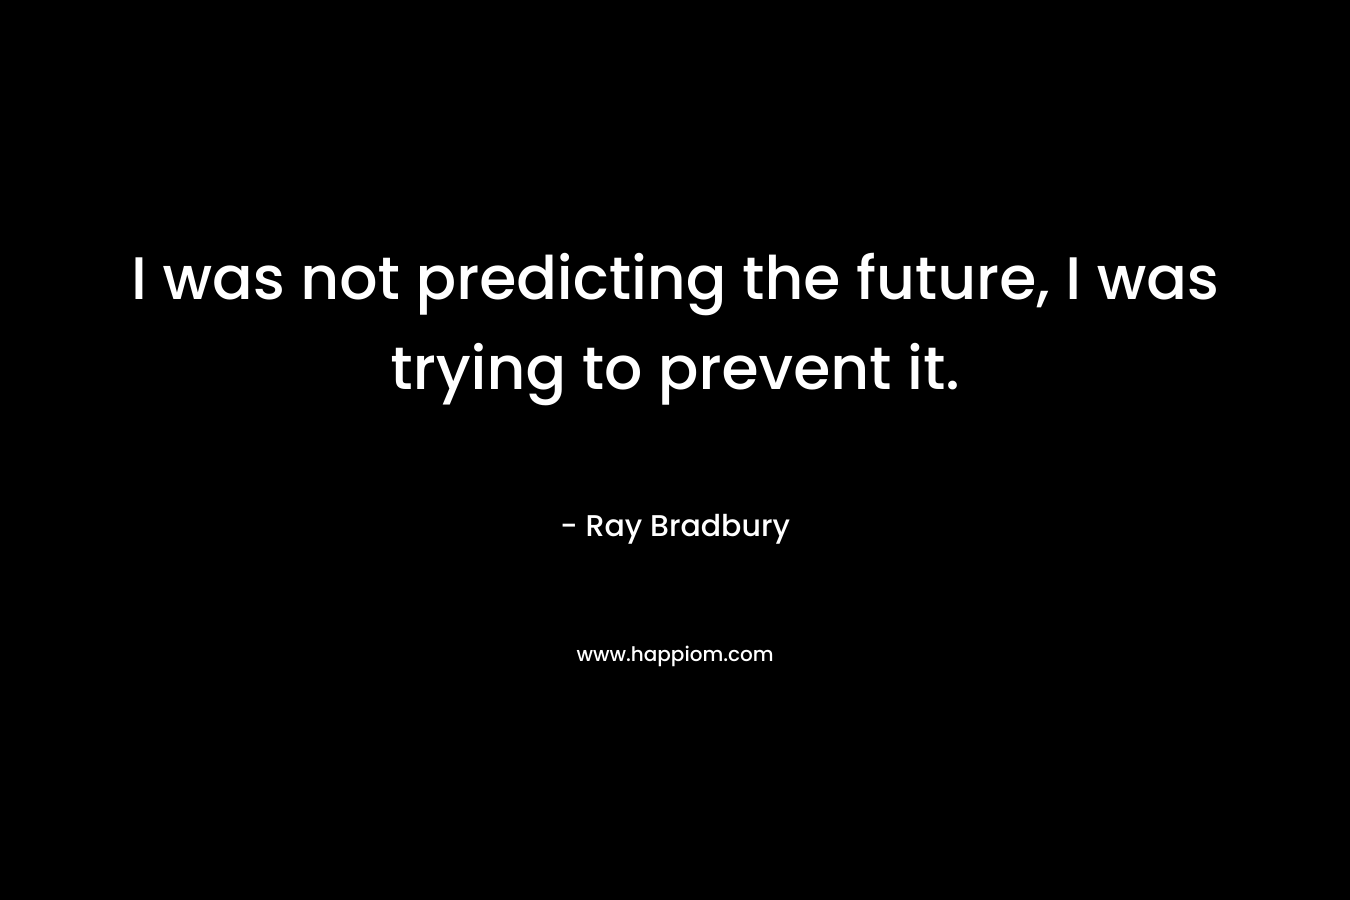 I was not predicting the future, I was trying to prevent it. – Ray Bradbury